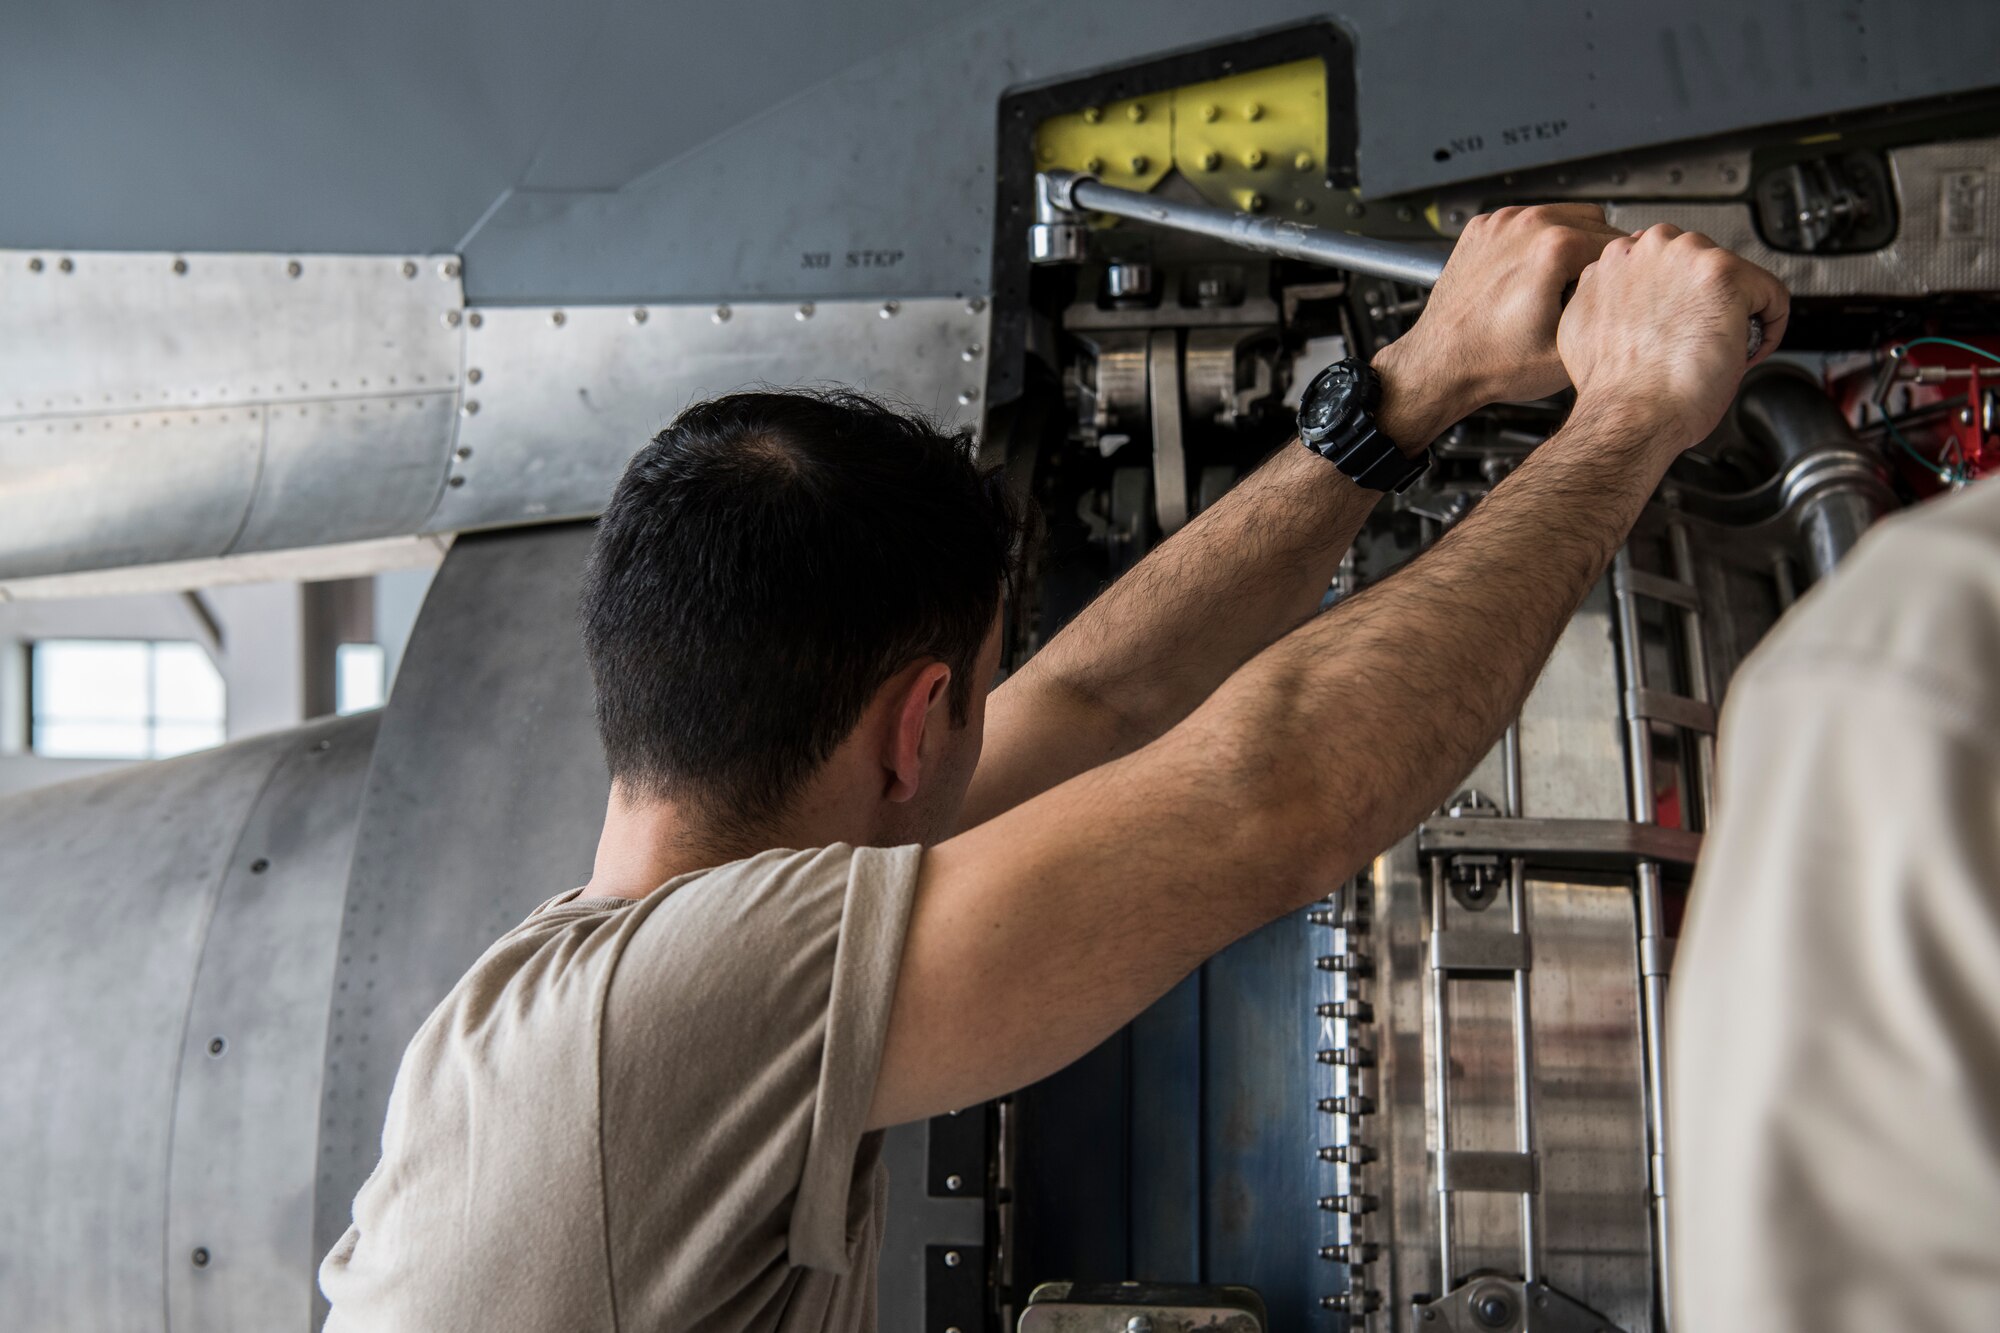 Senior Airman Chad Helminiak, 60th Aircraft Maintenance Squadron aerospace propulsion journeyman, unscrews a bolt June 6, 2019, Dover Air Base, Del. Unscrewing the bolts is the last step that must be completed in order for the C-5M Super Galaxy engine to be lowered. (U.S. Air Force photo by Senior Airman Christopher Quail)